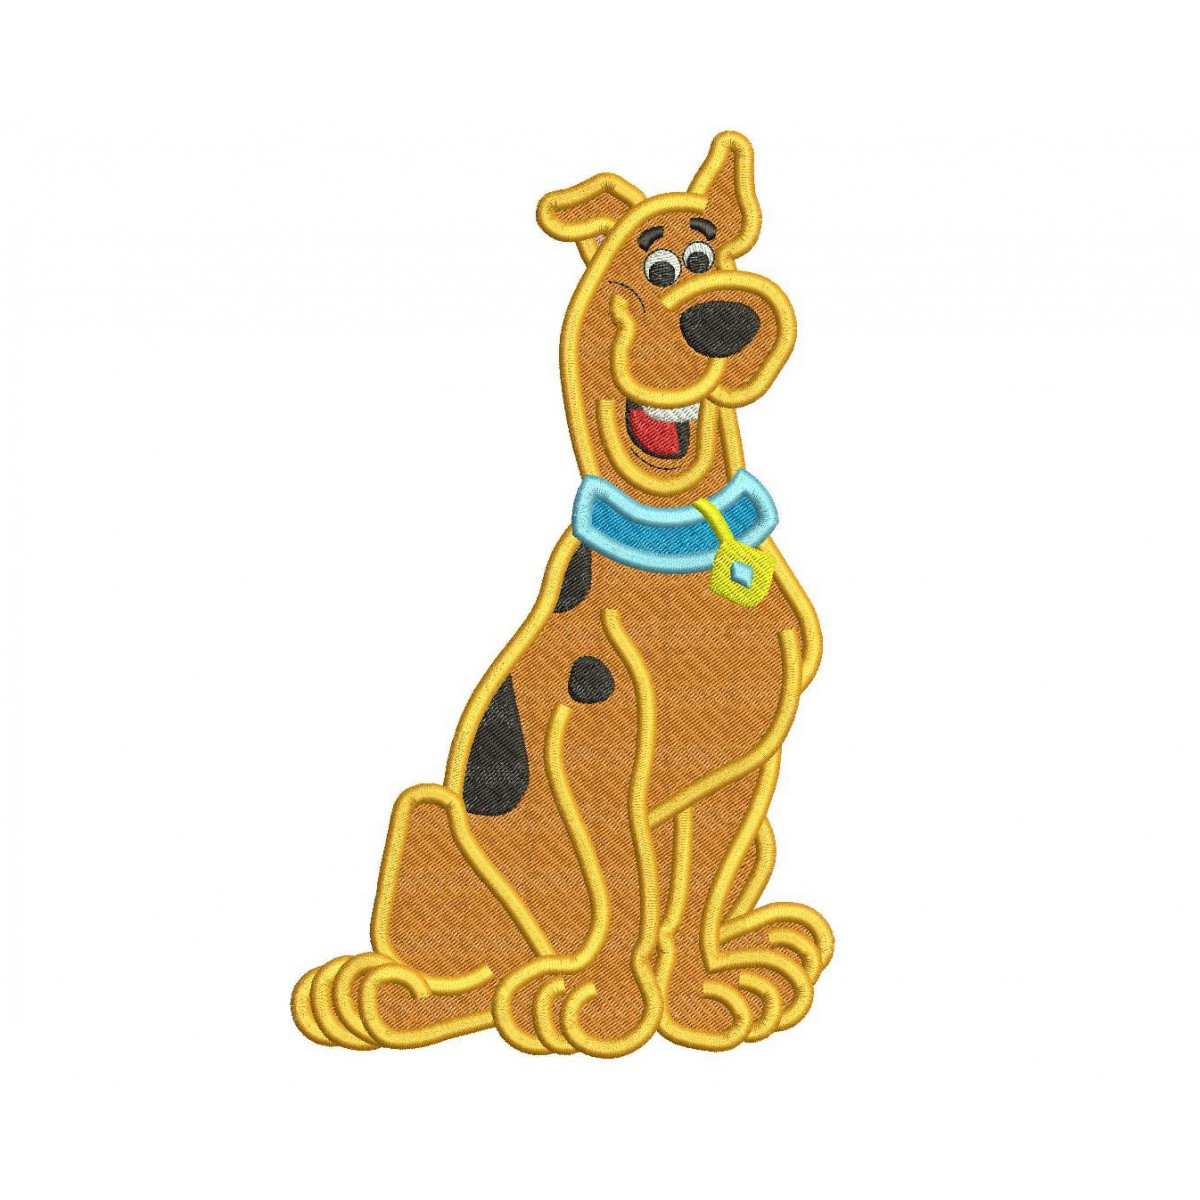 https://appliquedesignz.com/image/cache/data/Scooby_Doo_Machine_Embroidery_Design_Filled_205_0-1200x1200.jpg